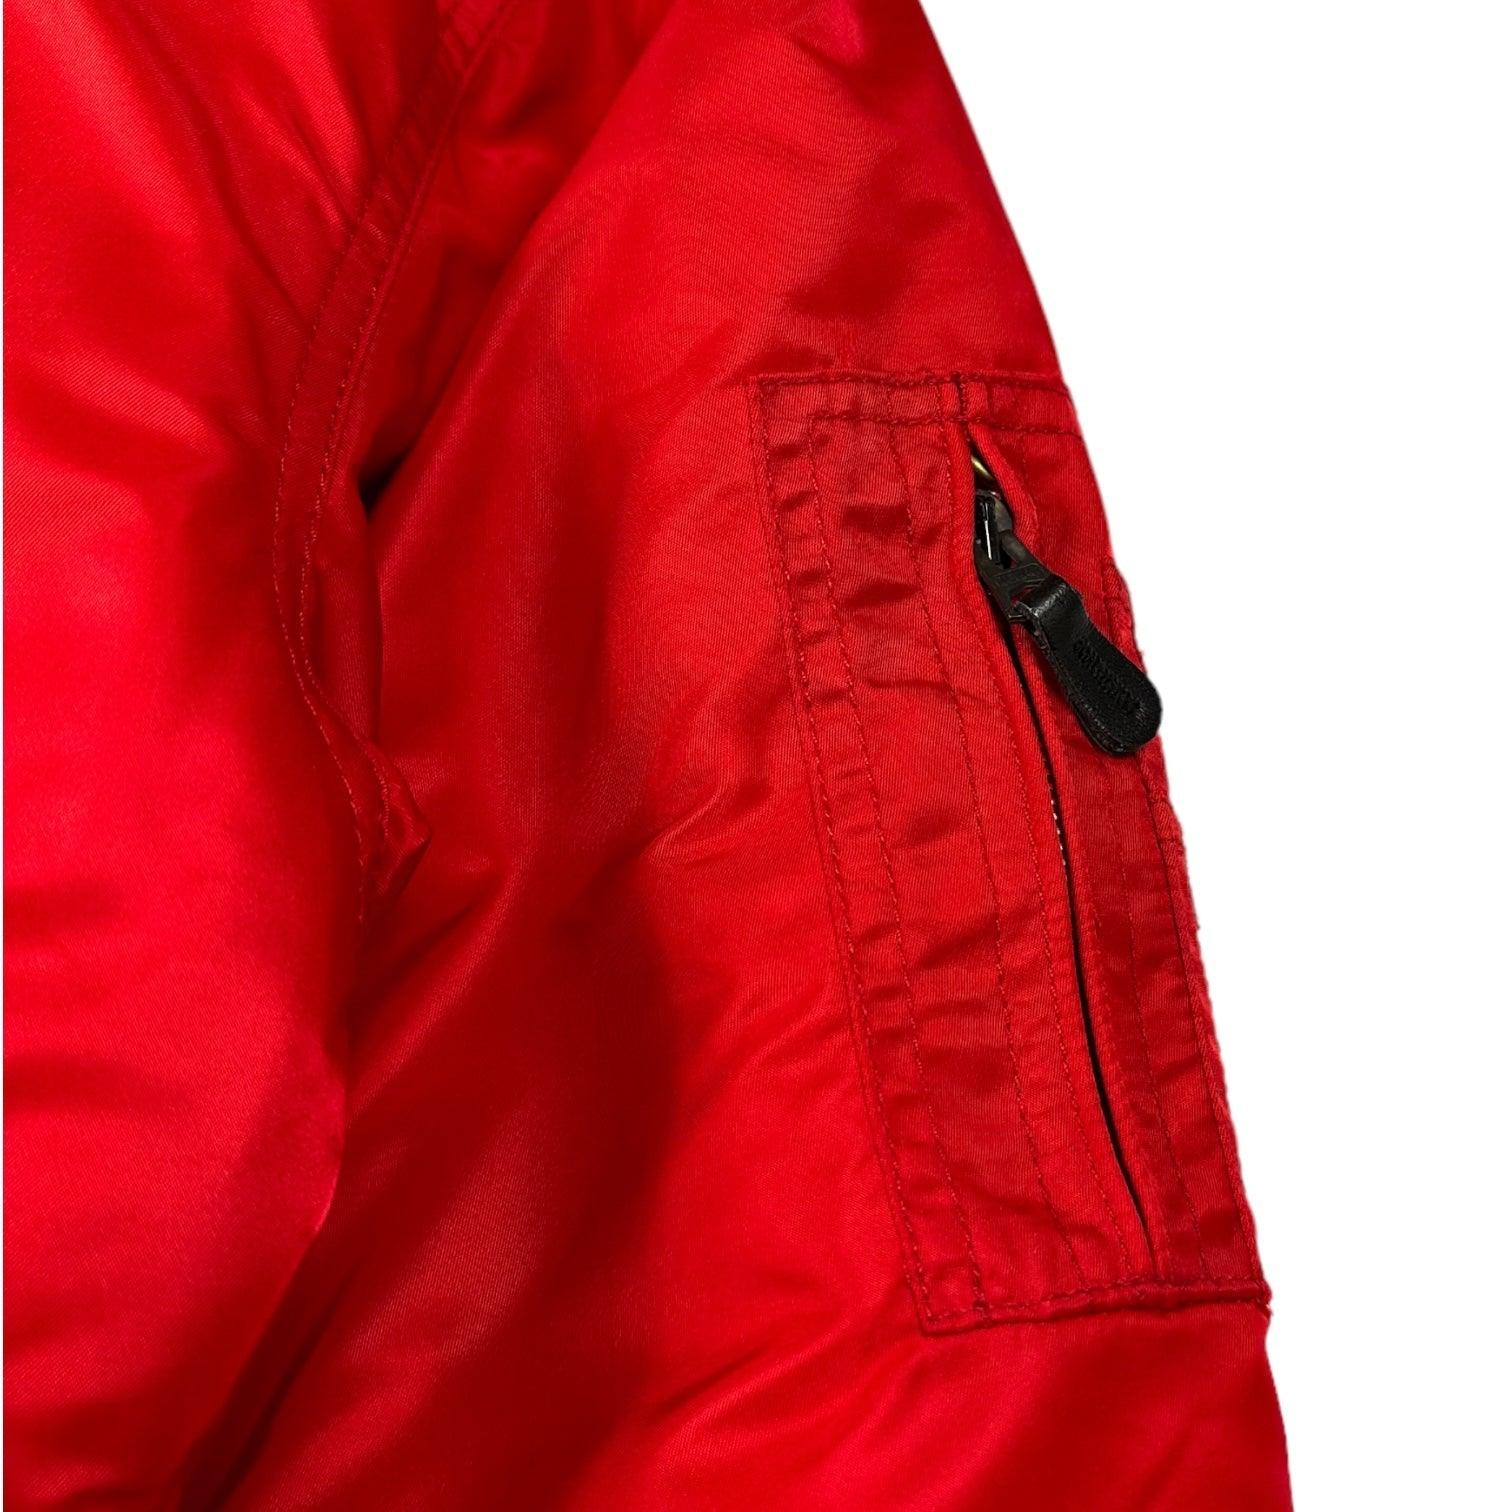 Schott NYC Red Bomber Jacket - Known Source